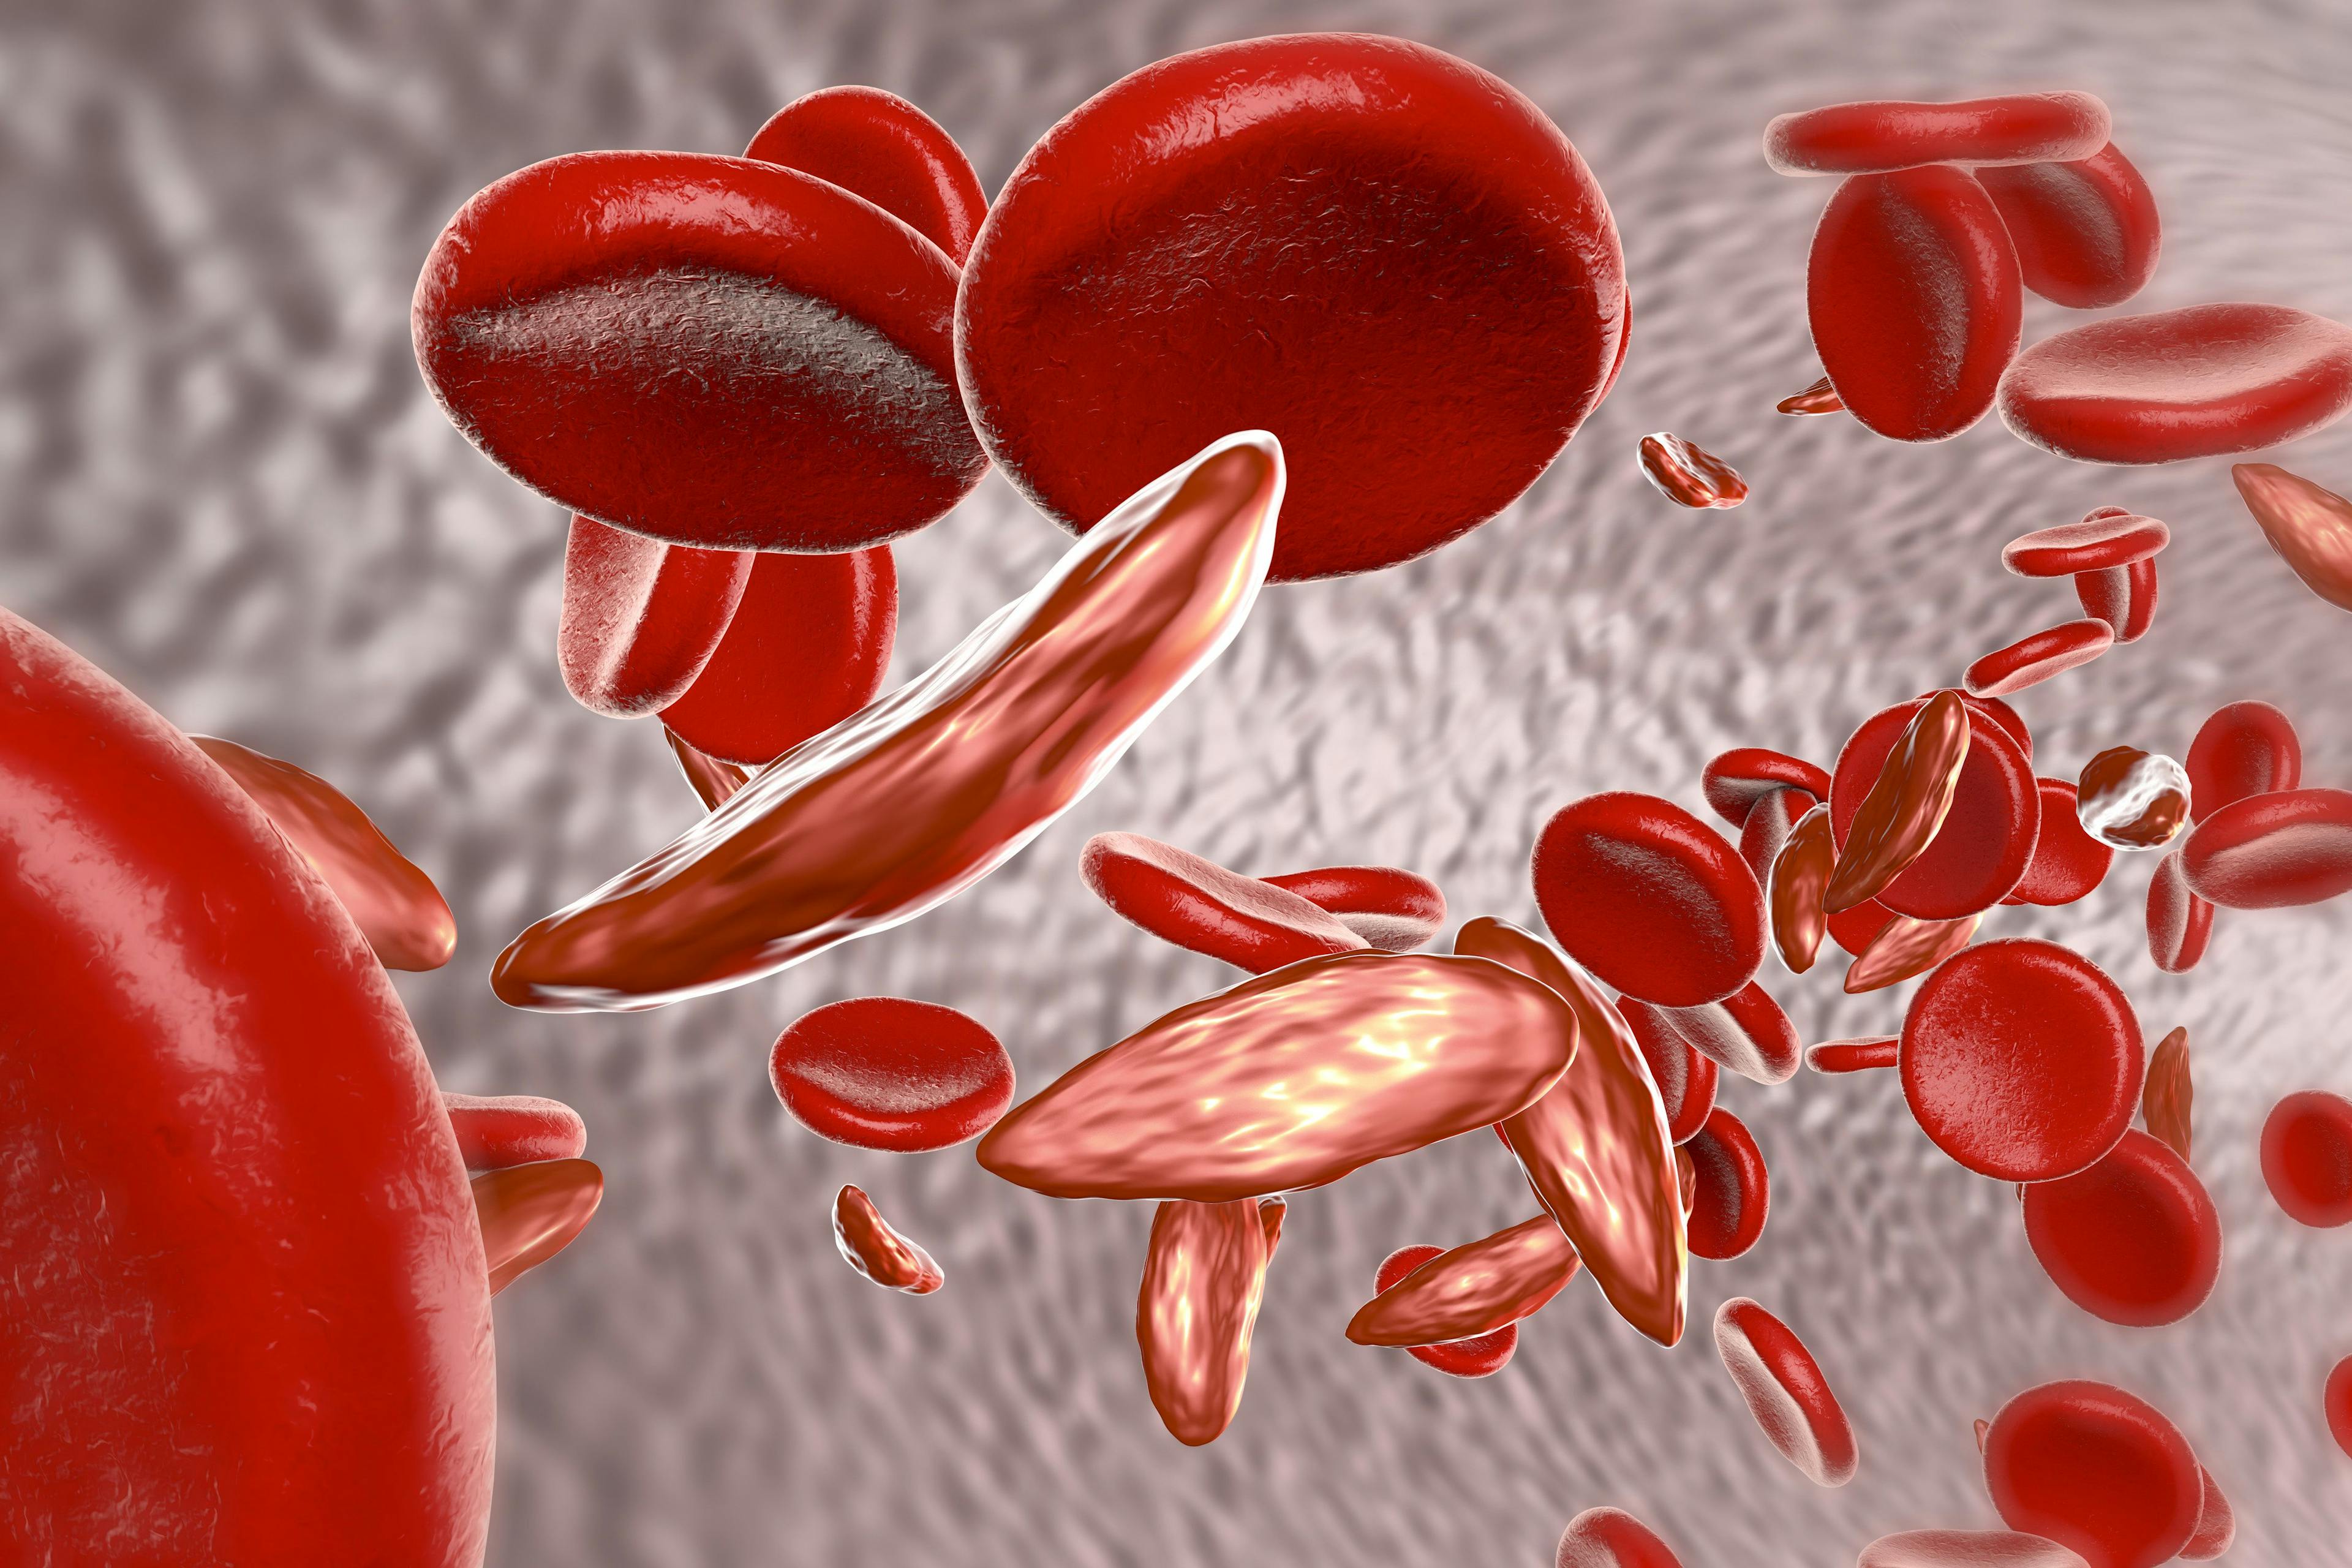 The Impact of Sickle Cell Disease Severity on HRQOL and Economic Outcomes